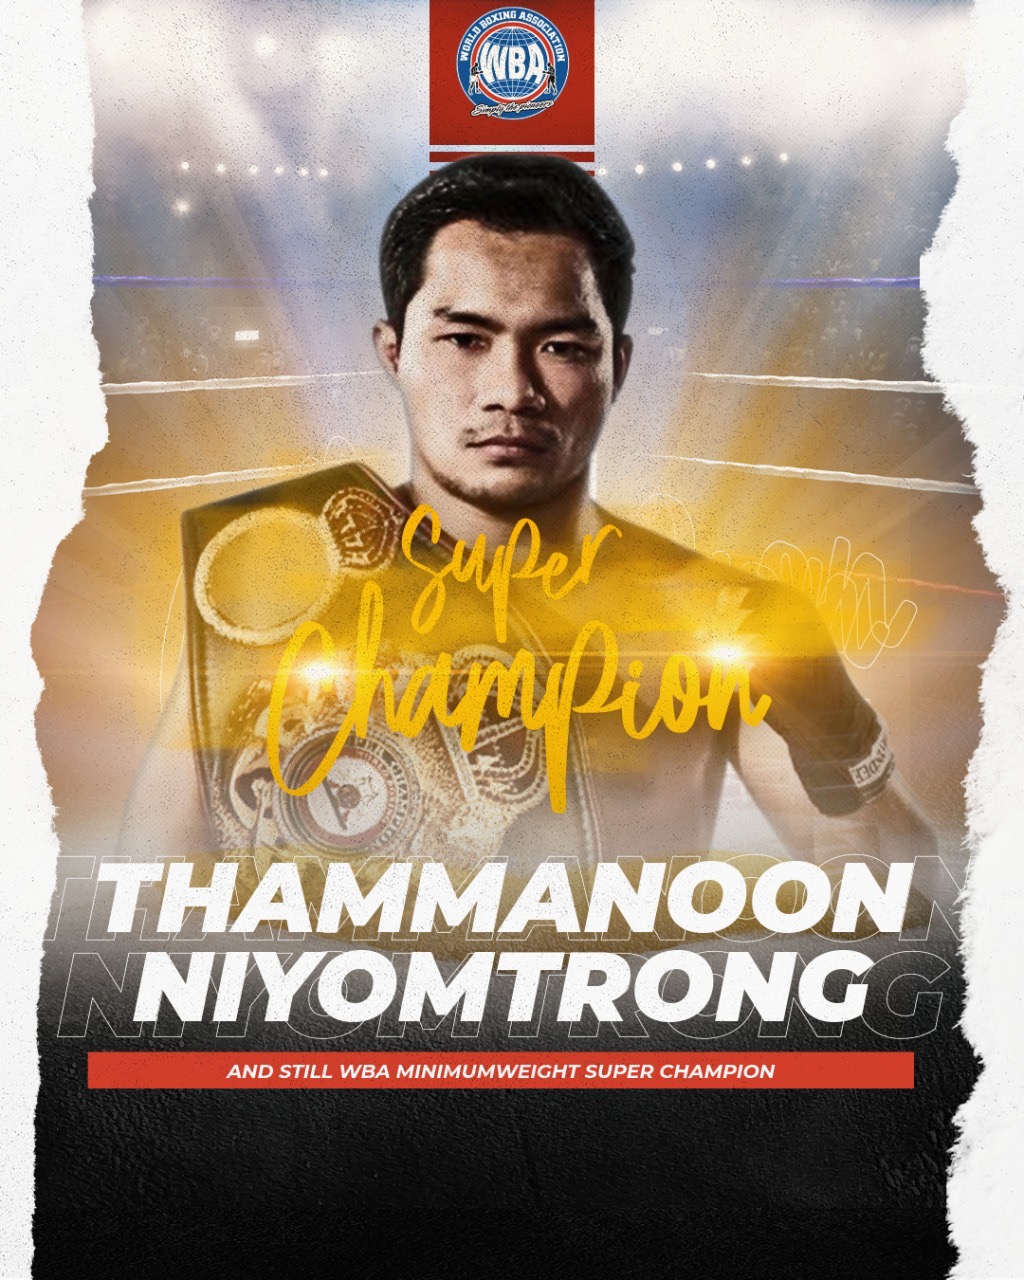 Niyomtrong defended his WBA belt with a stunning knockout